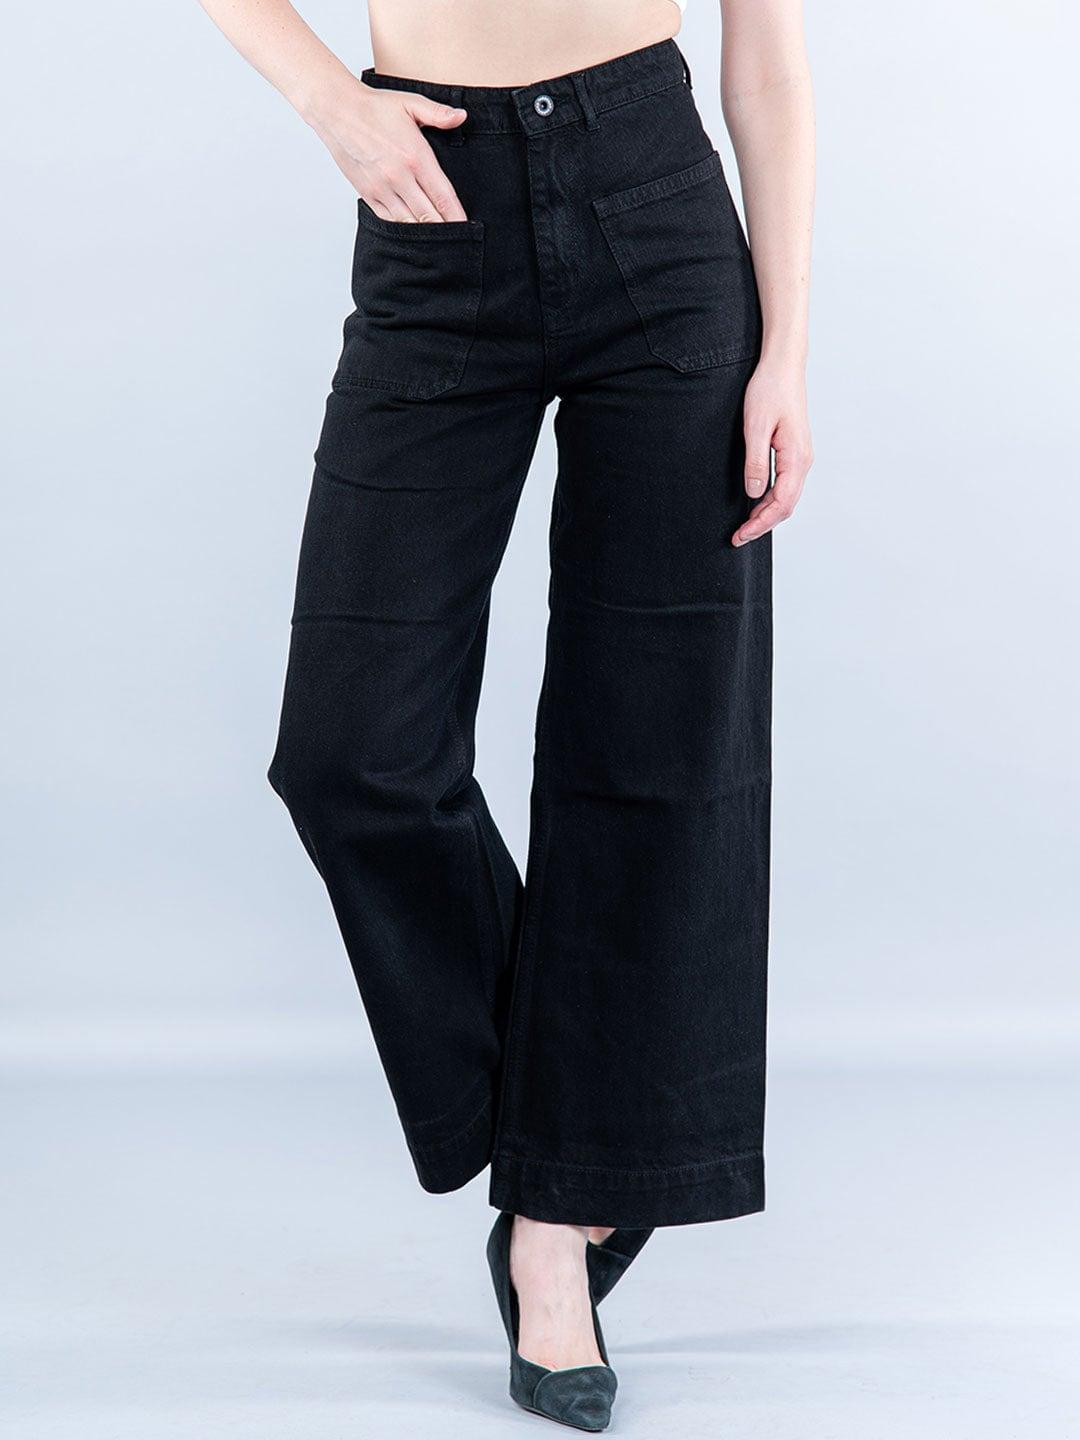 tistabene-women-comfort-stretchable-wide-leg-jeans